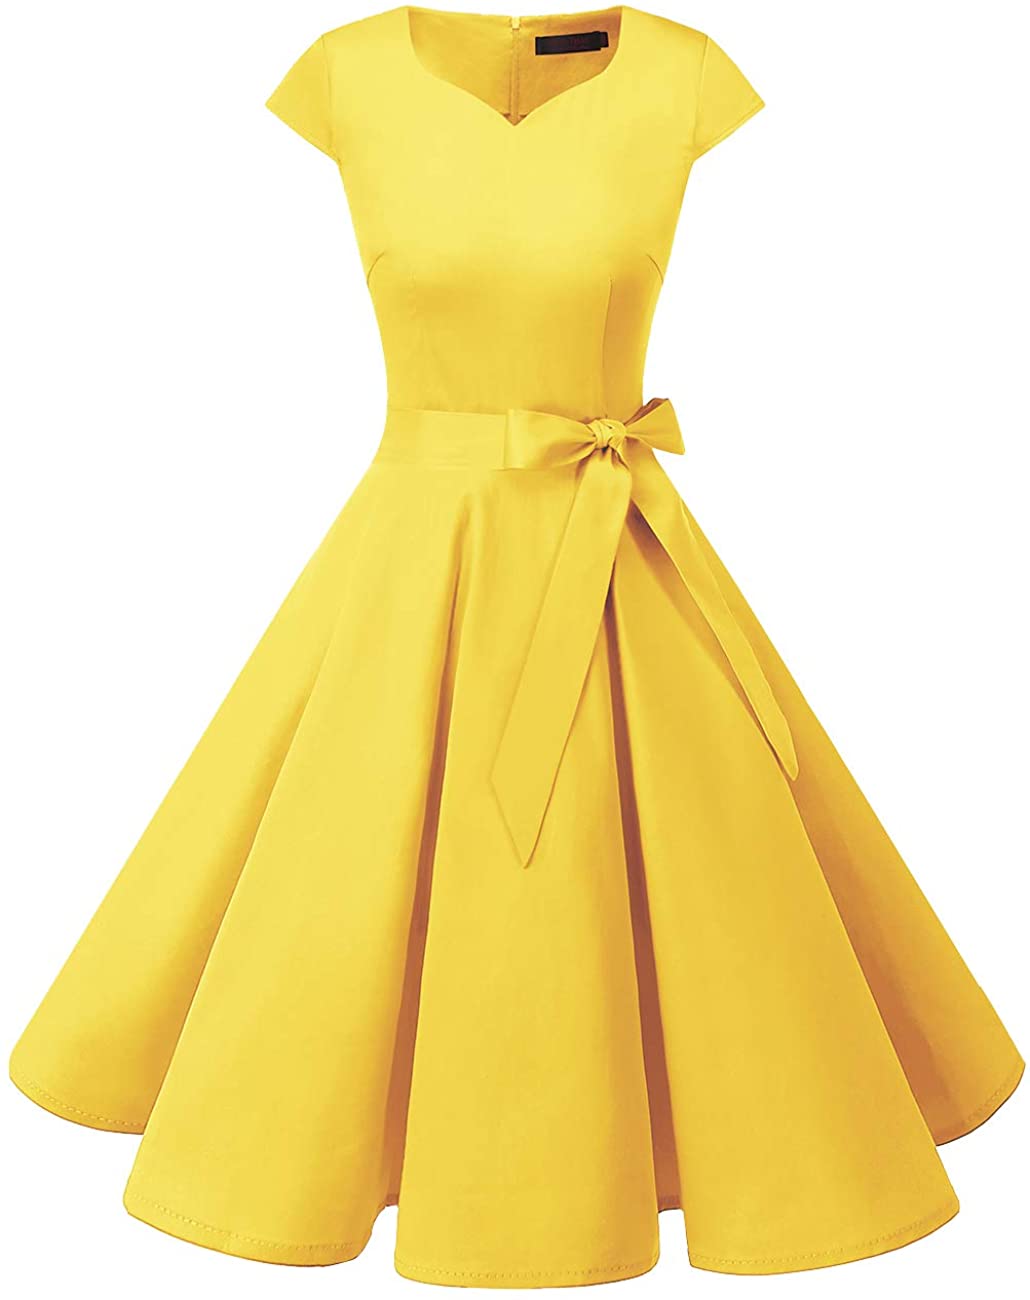 Price:$15.99    DRESSTELLS Women's Vintage Tea Dress Prom Swing Cocktail Party Dress with Cap-Sleeves  Clothing